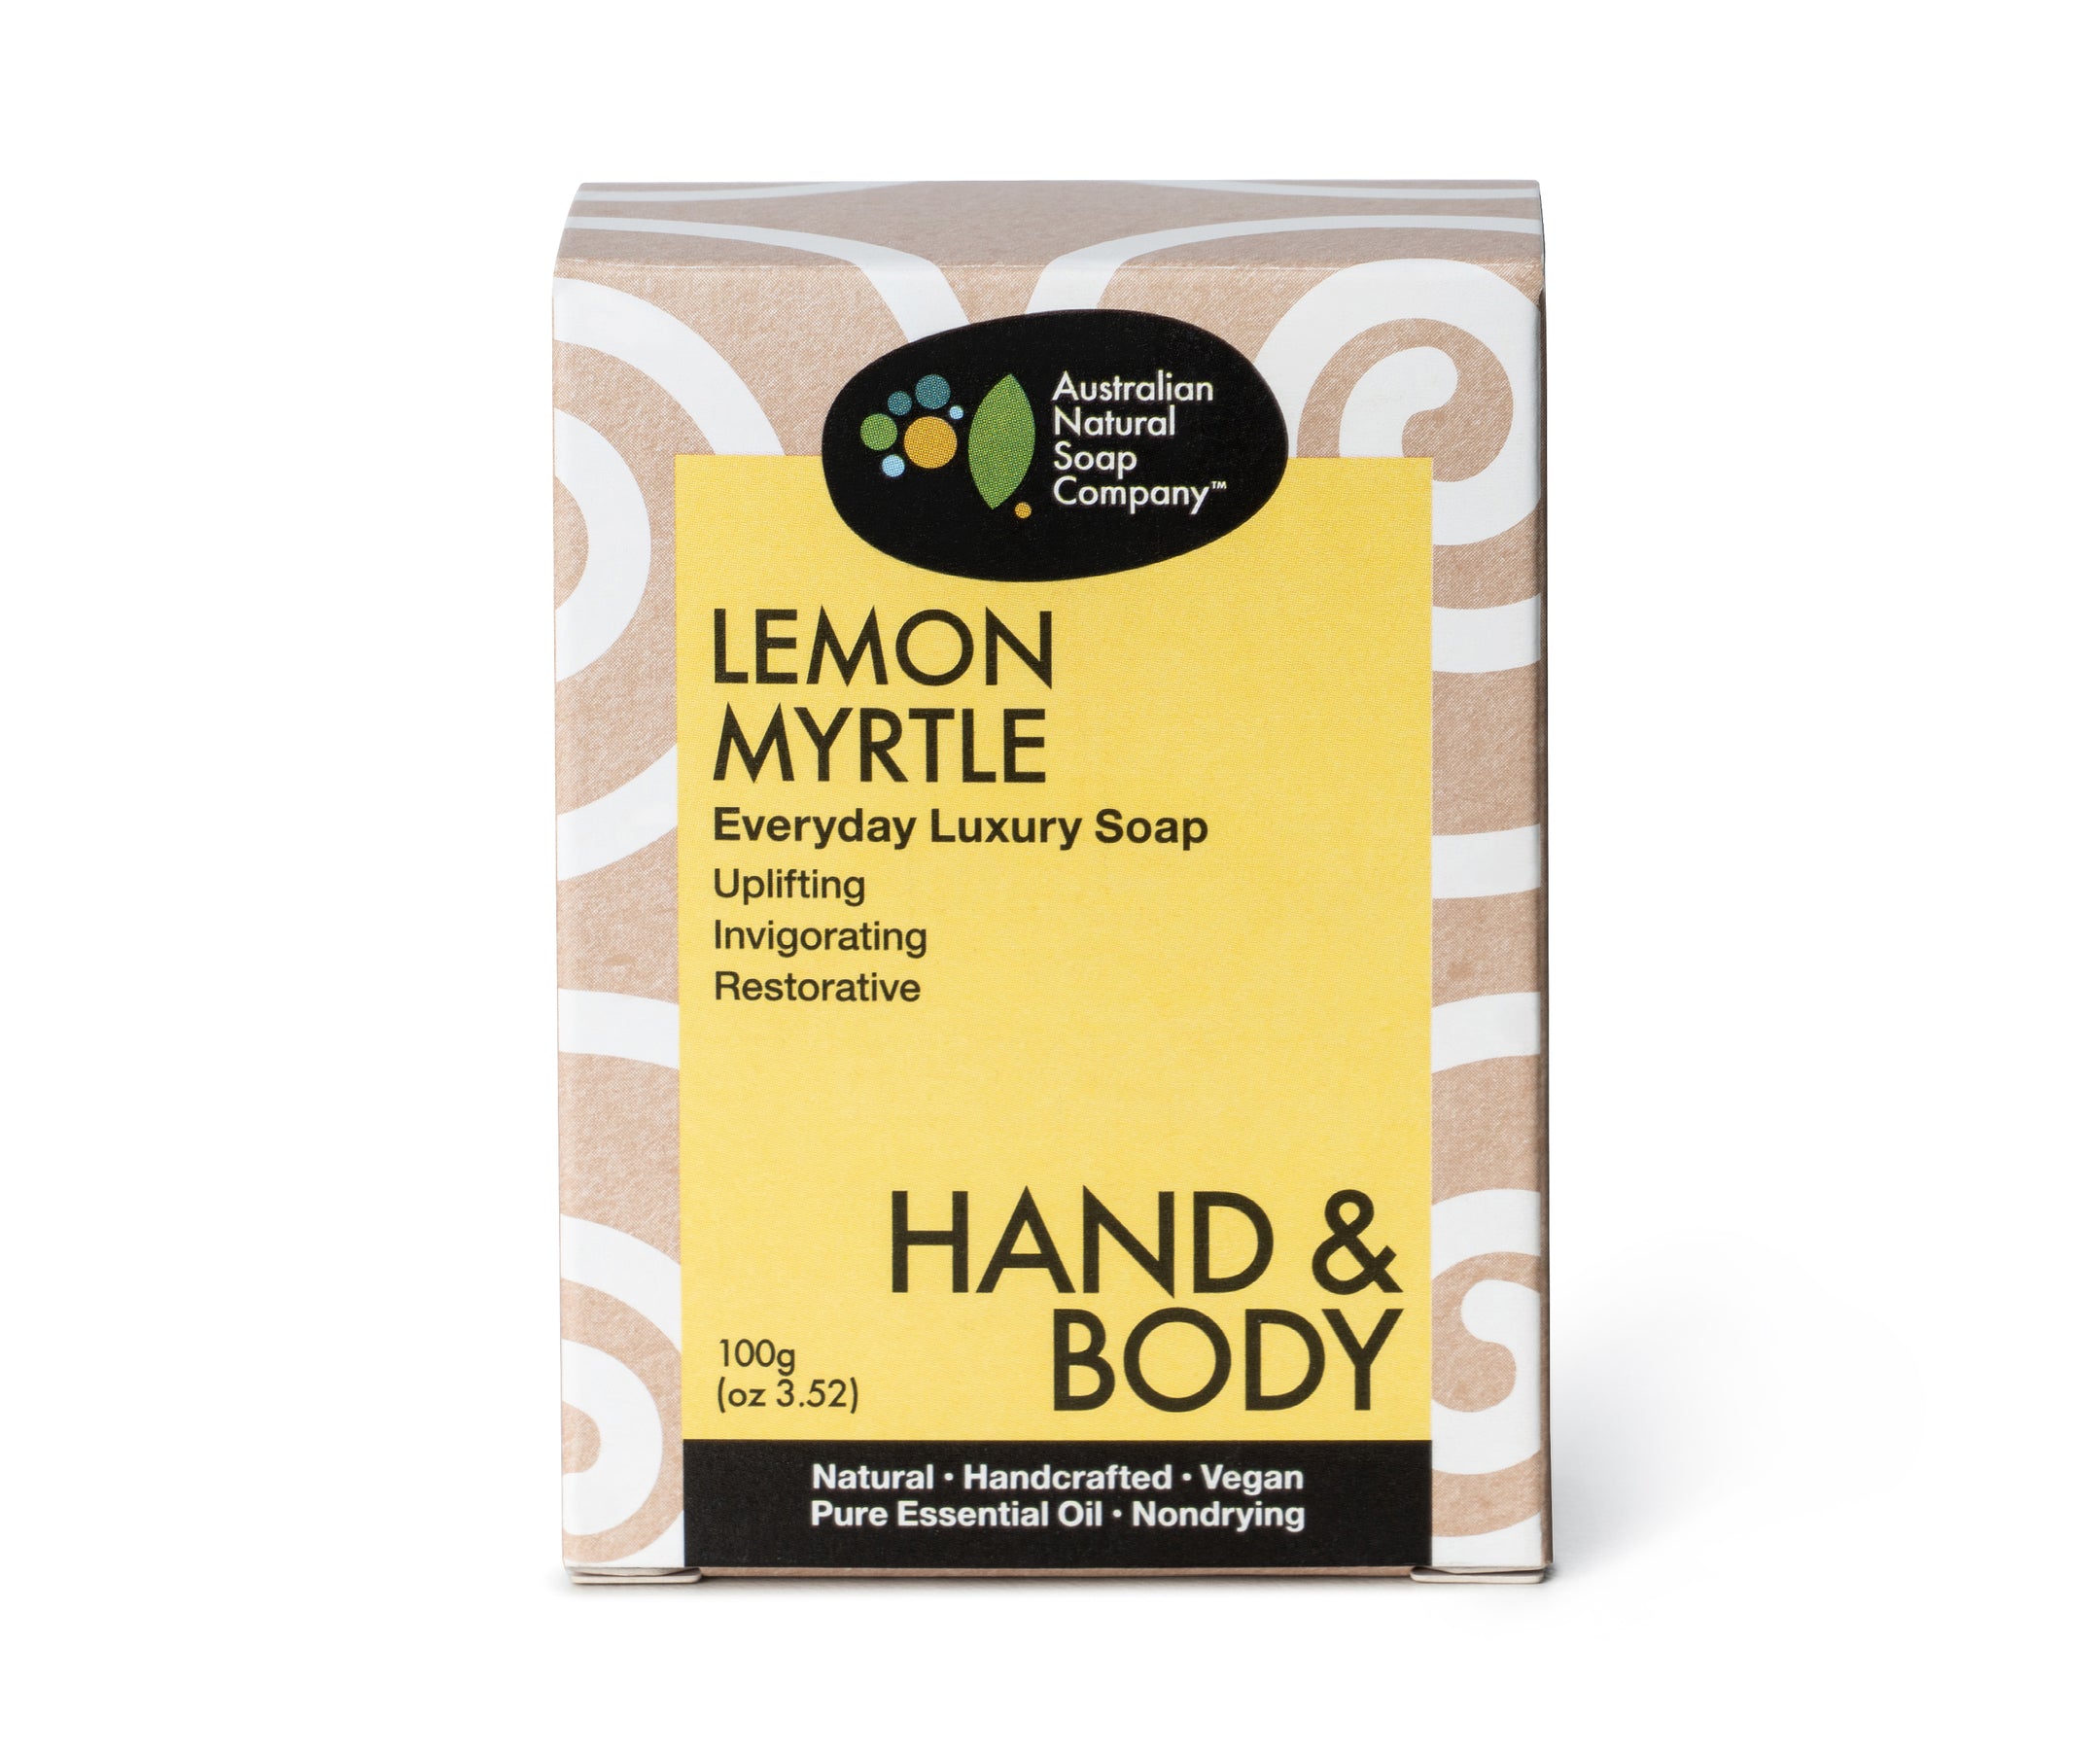 Australian Natural Soap Company handcrafted lemon myrtle hand body bar front of box